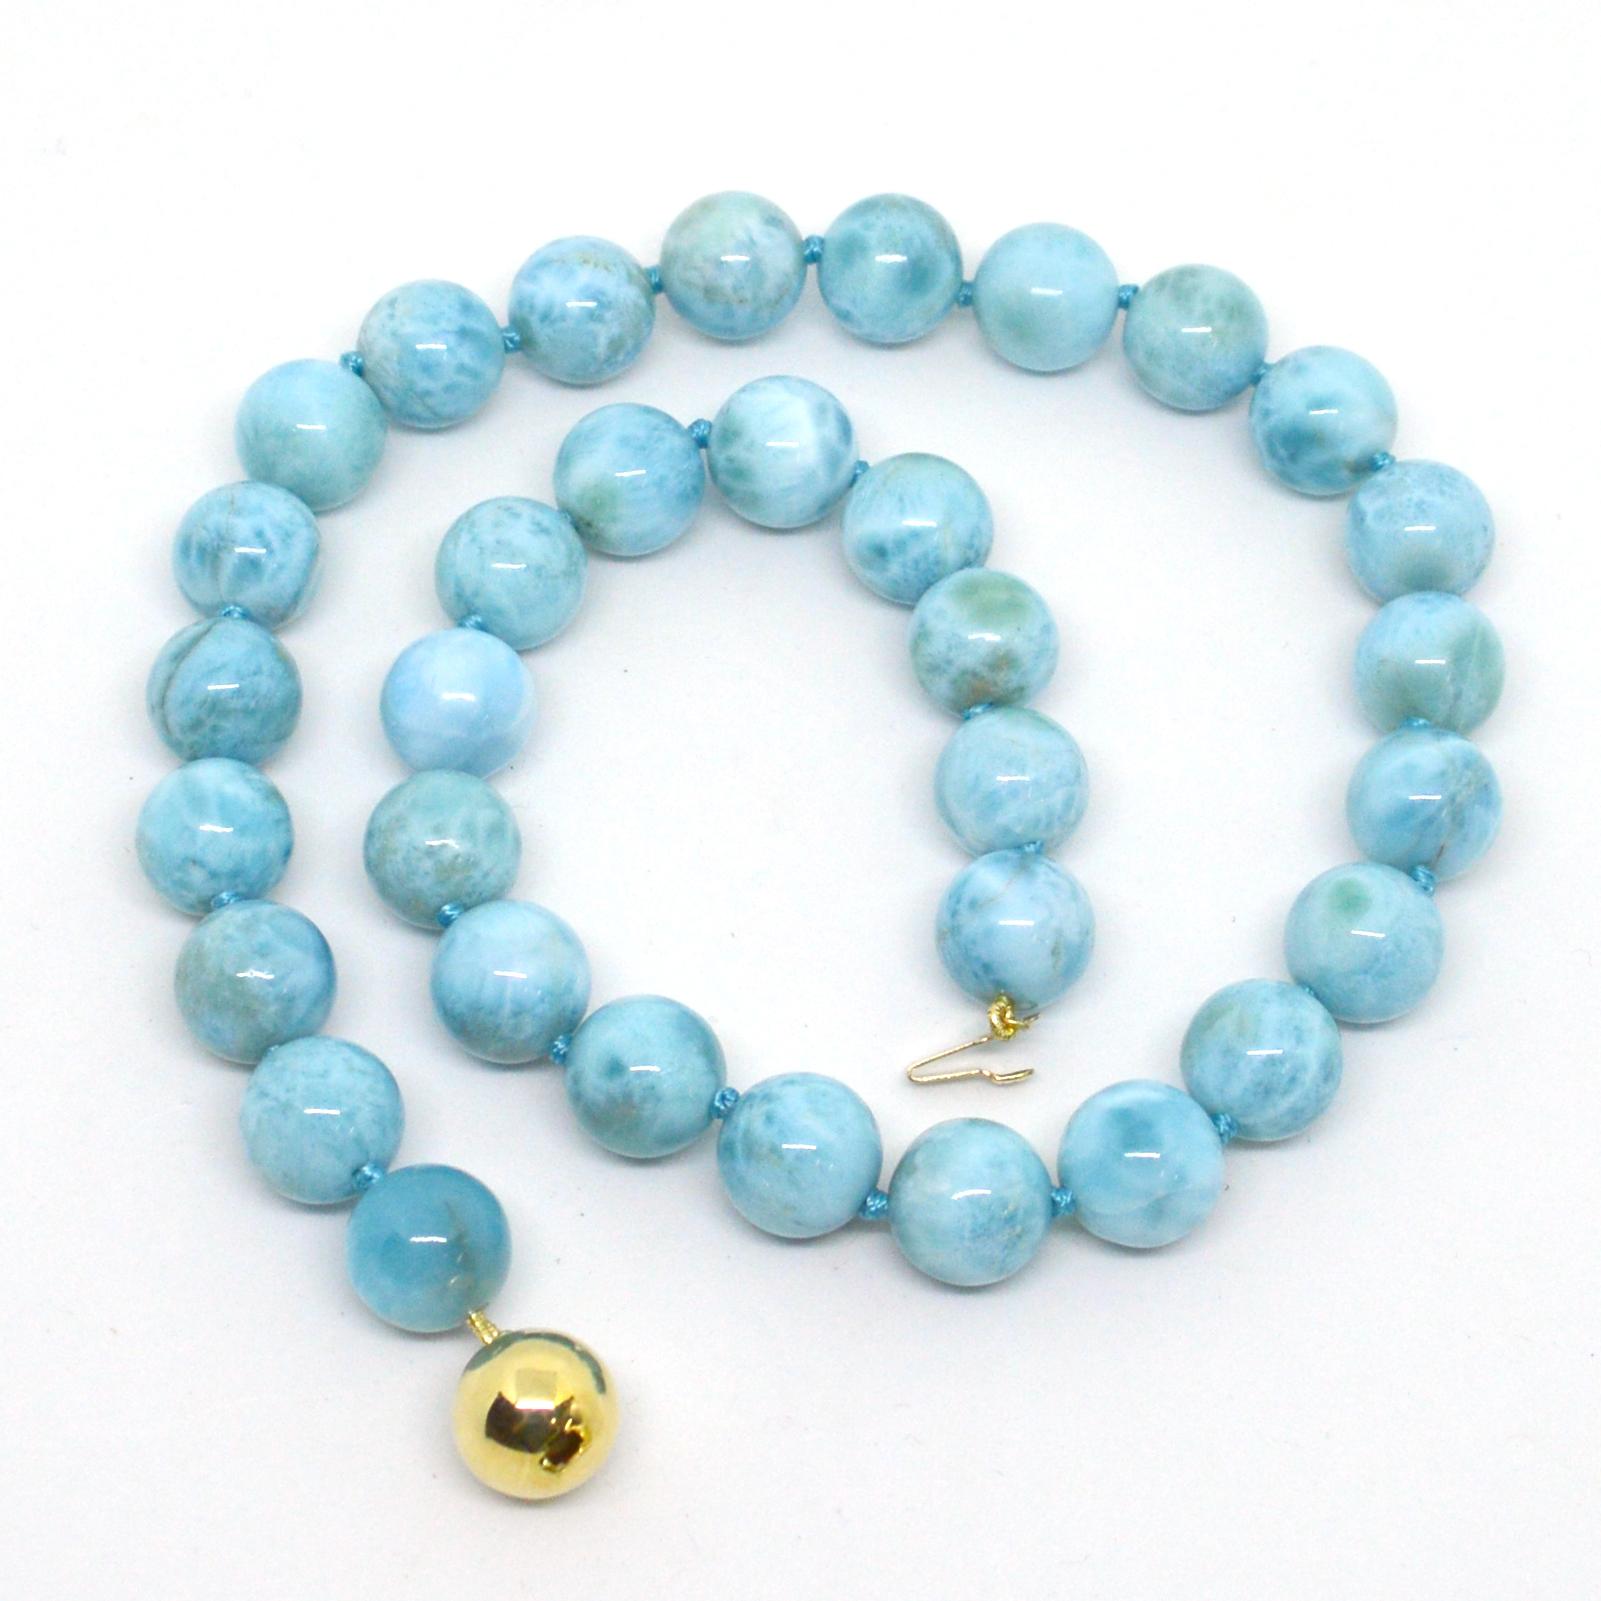 Beautiful high grade Larimar necklace hand knotted on matching thread with a 9 carat gold ball clasp.
Beads are 12mm and necklace measures 45cm in length.